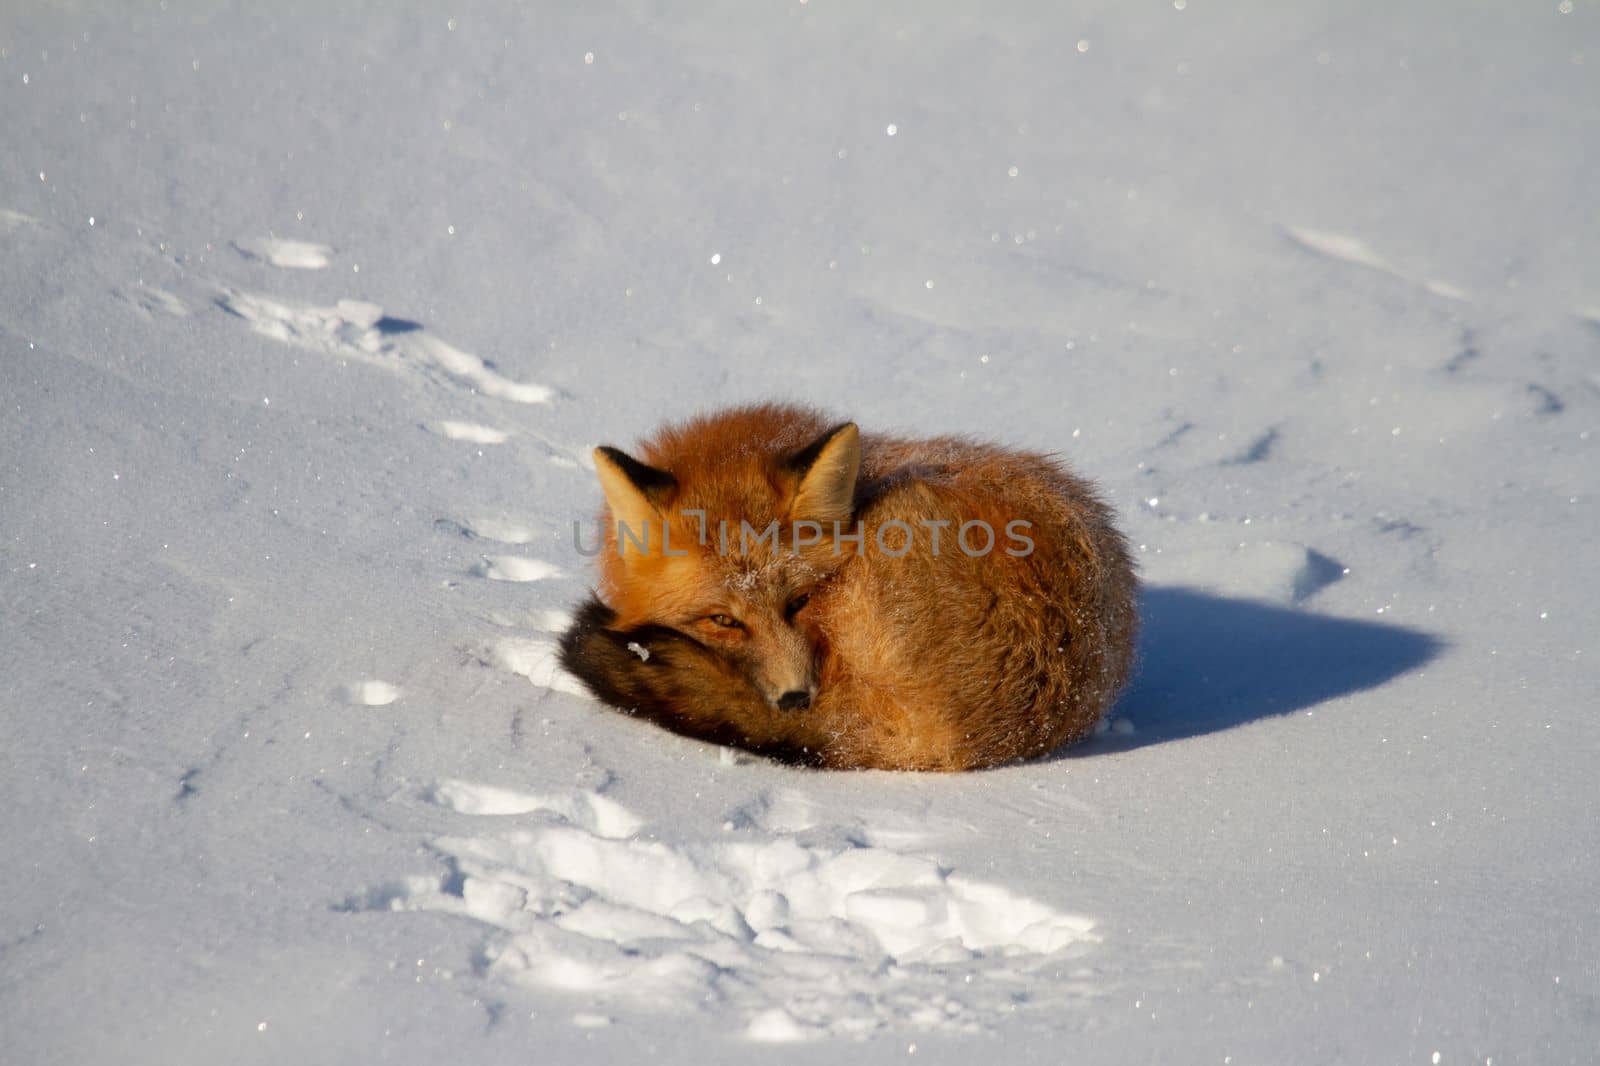 A red fox curled up in a snowbank near Churchill, Manitoba Canada